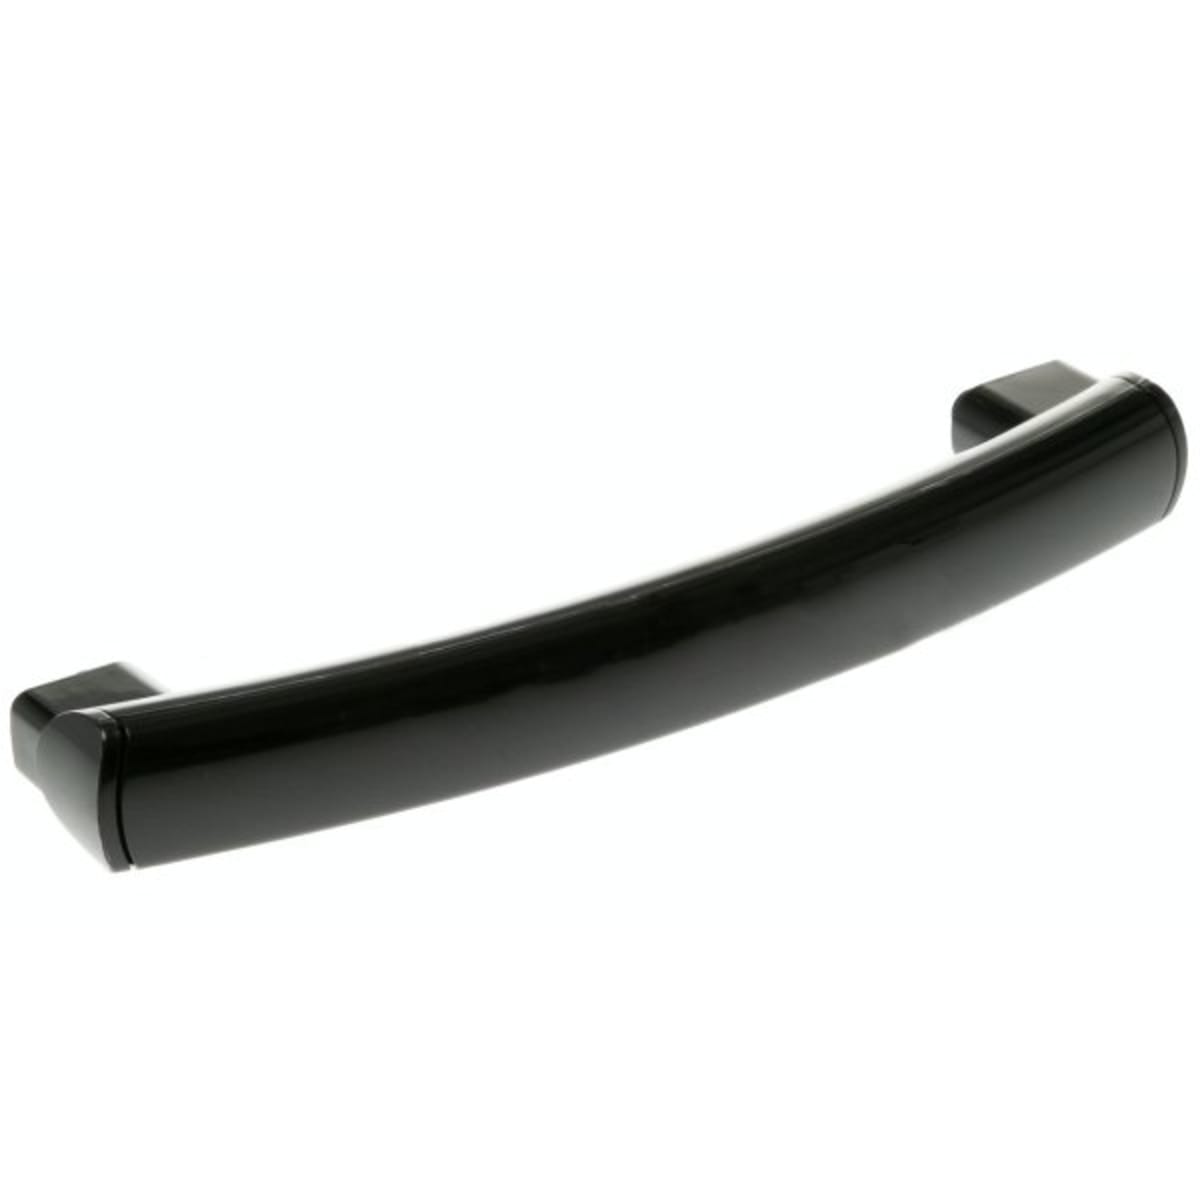 WB15X10065 - Microwave Door Handle, Black for General Electric